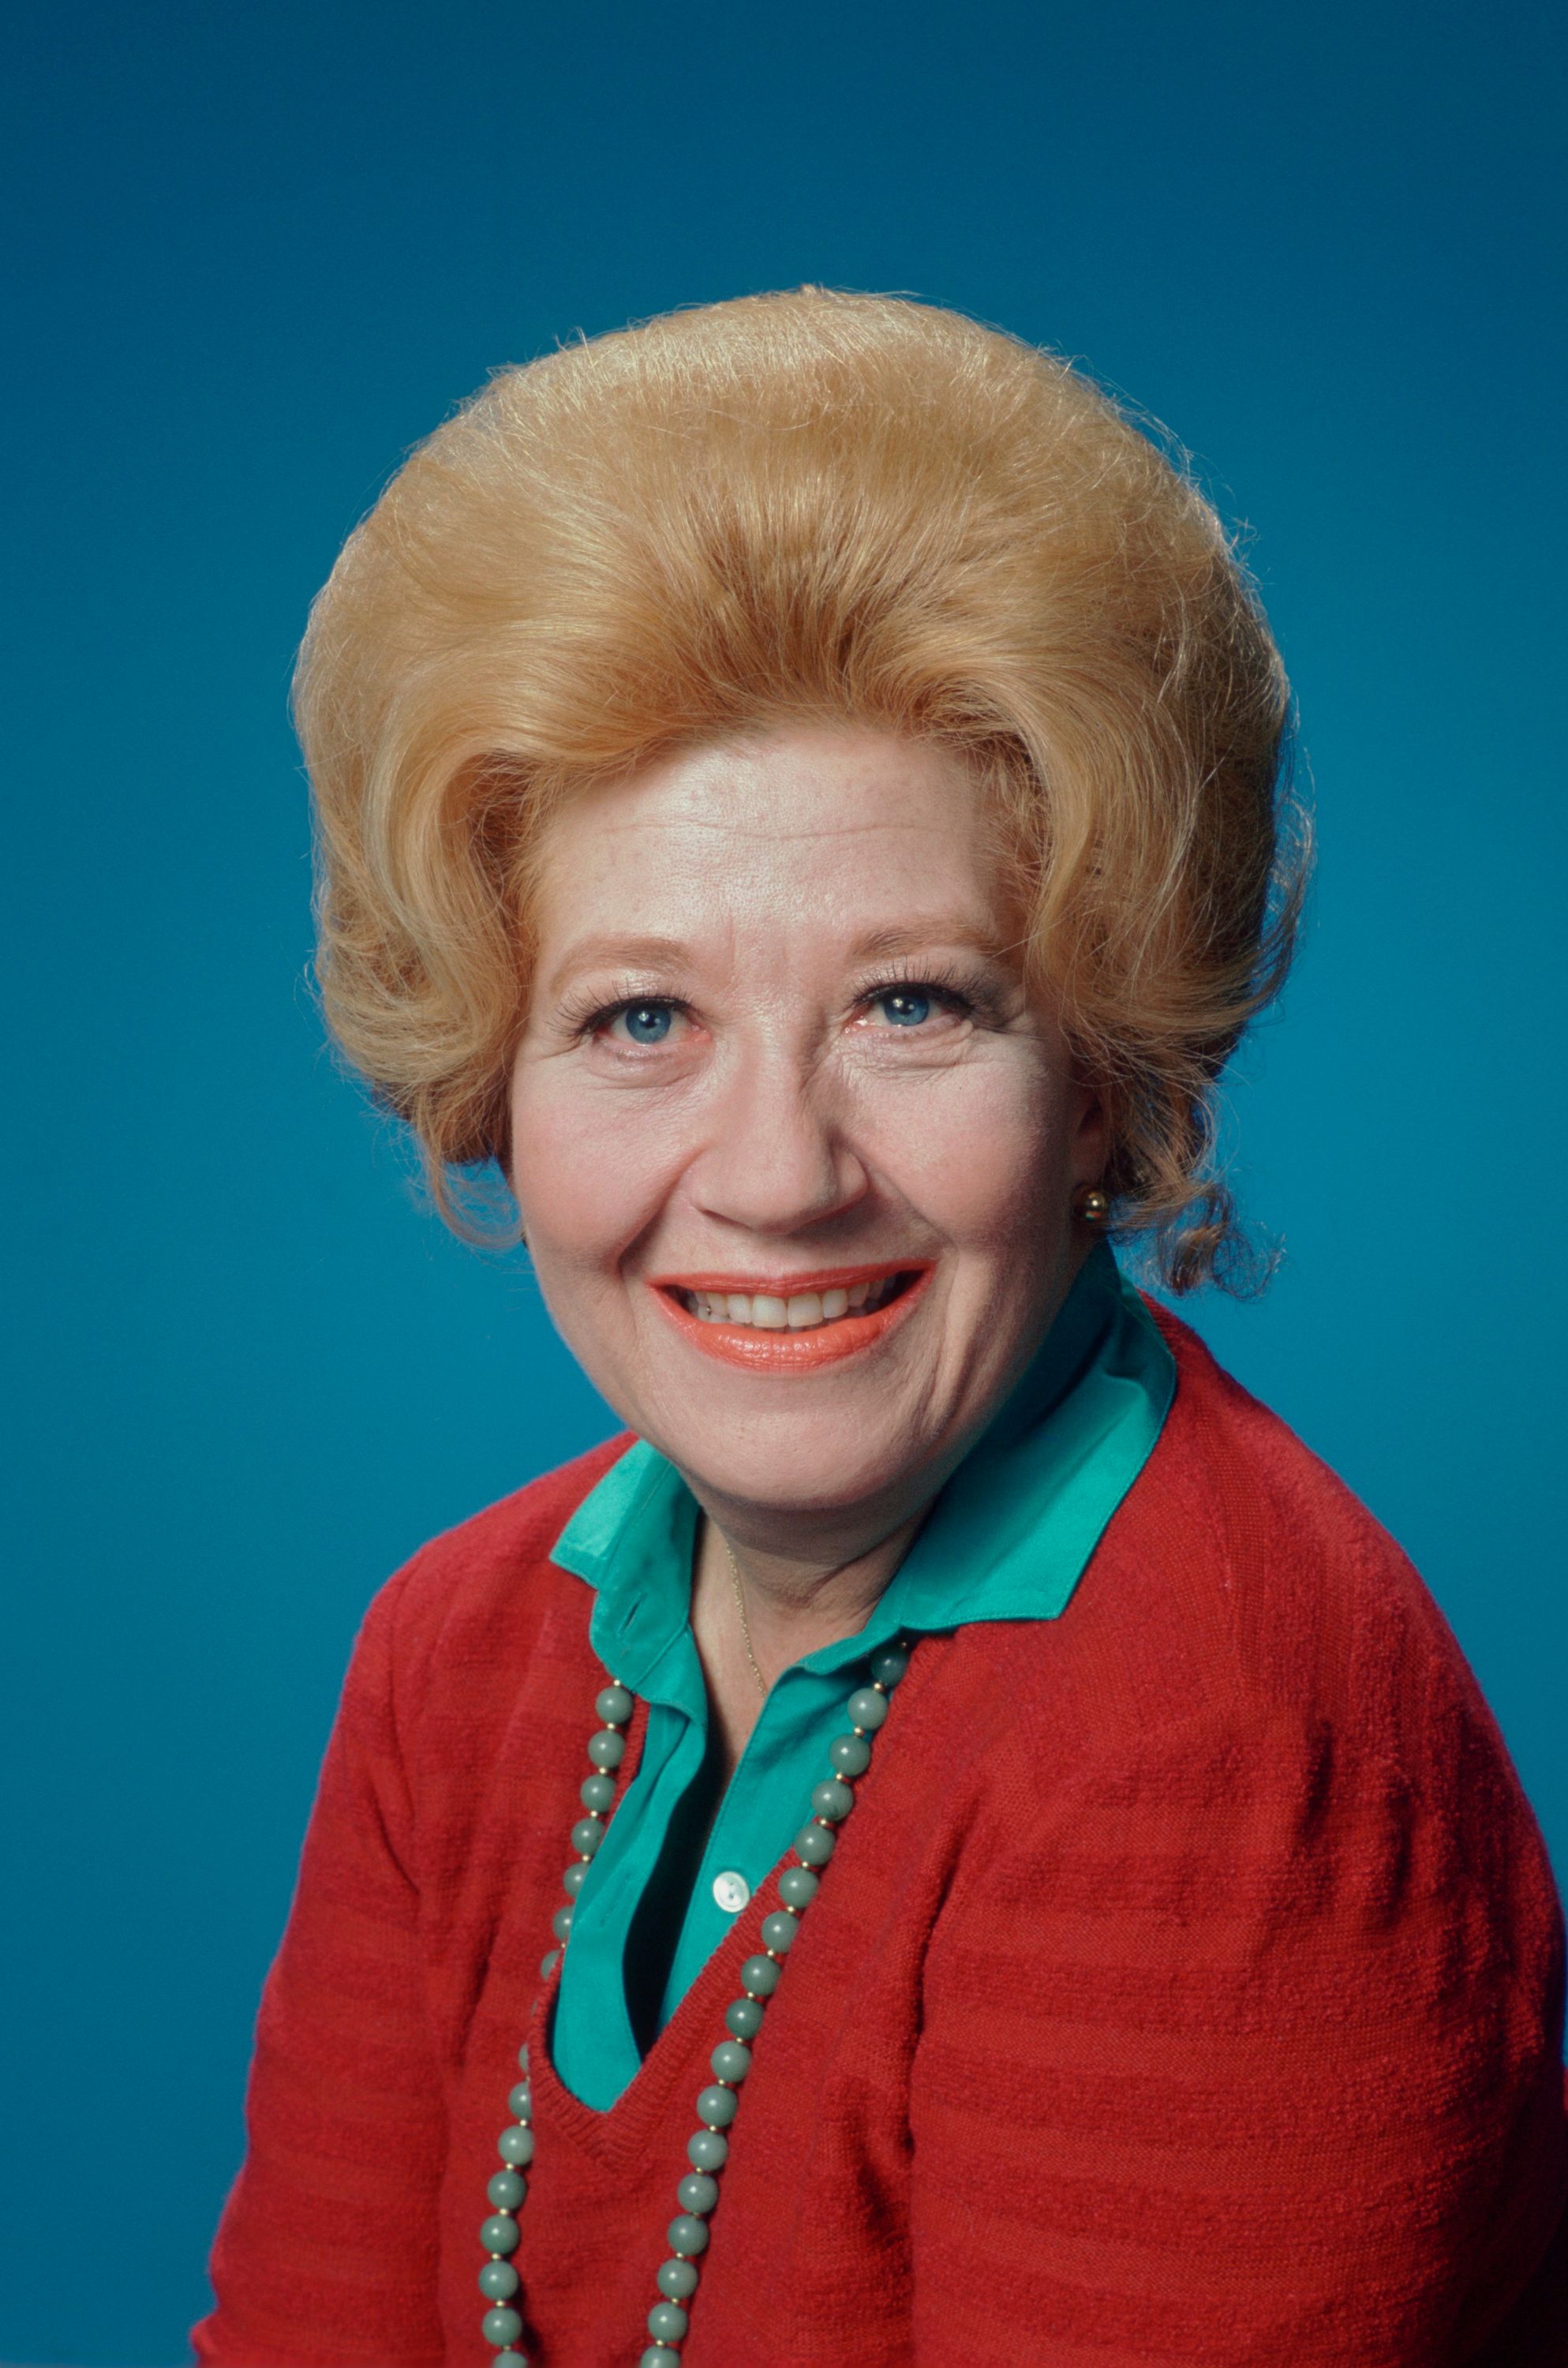 Charlotte Rae as Edna Garrett in "The Facts of Life," Season 1. | Source: Getty Images